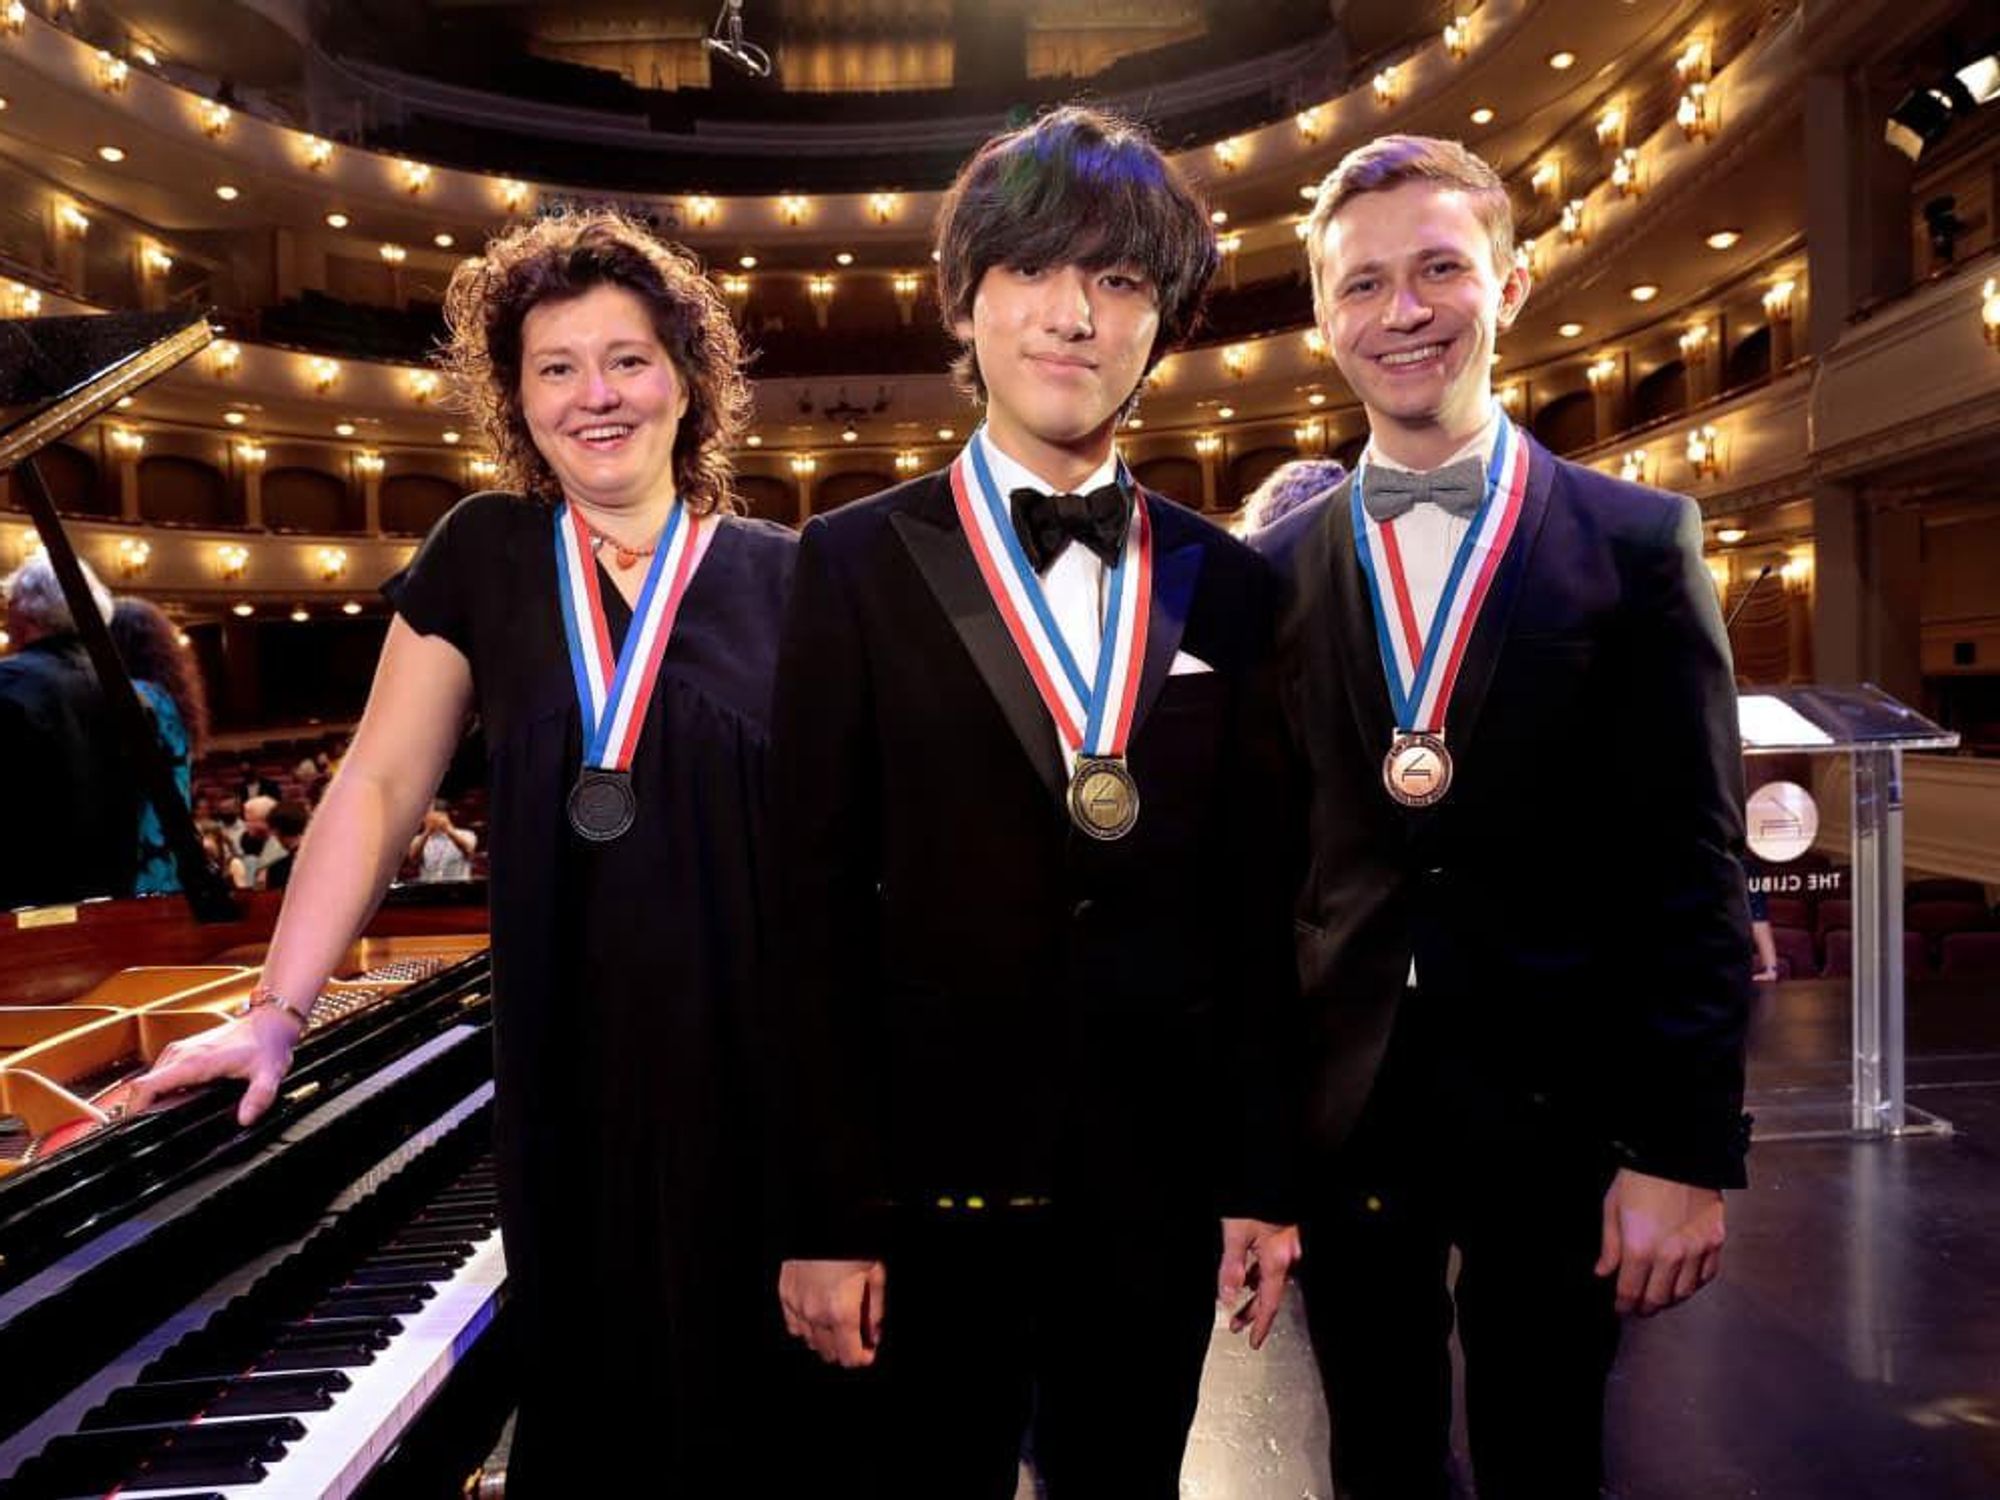 Meet the young competitors in this year's Cliburn International